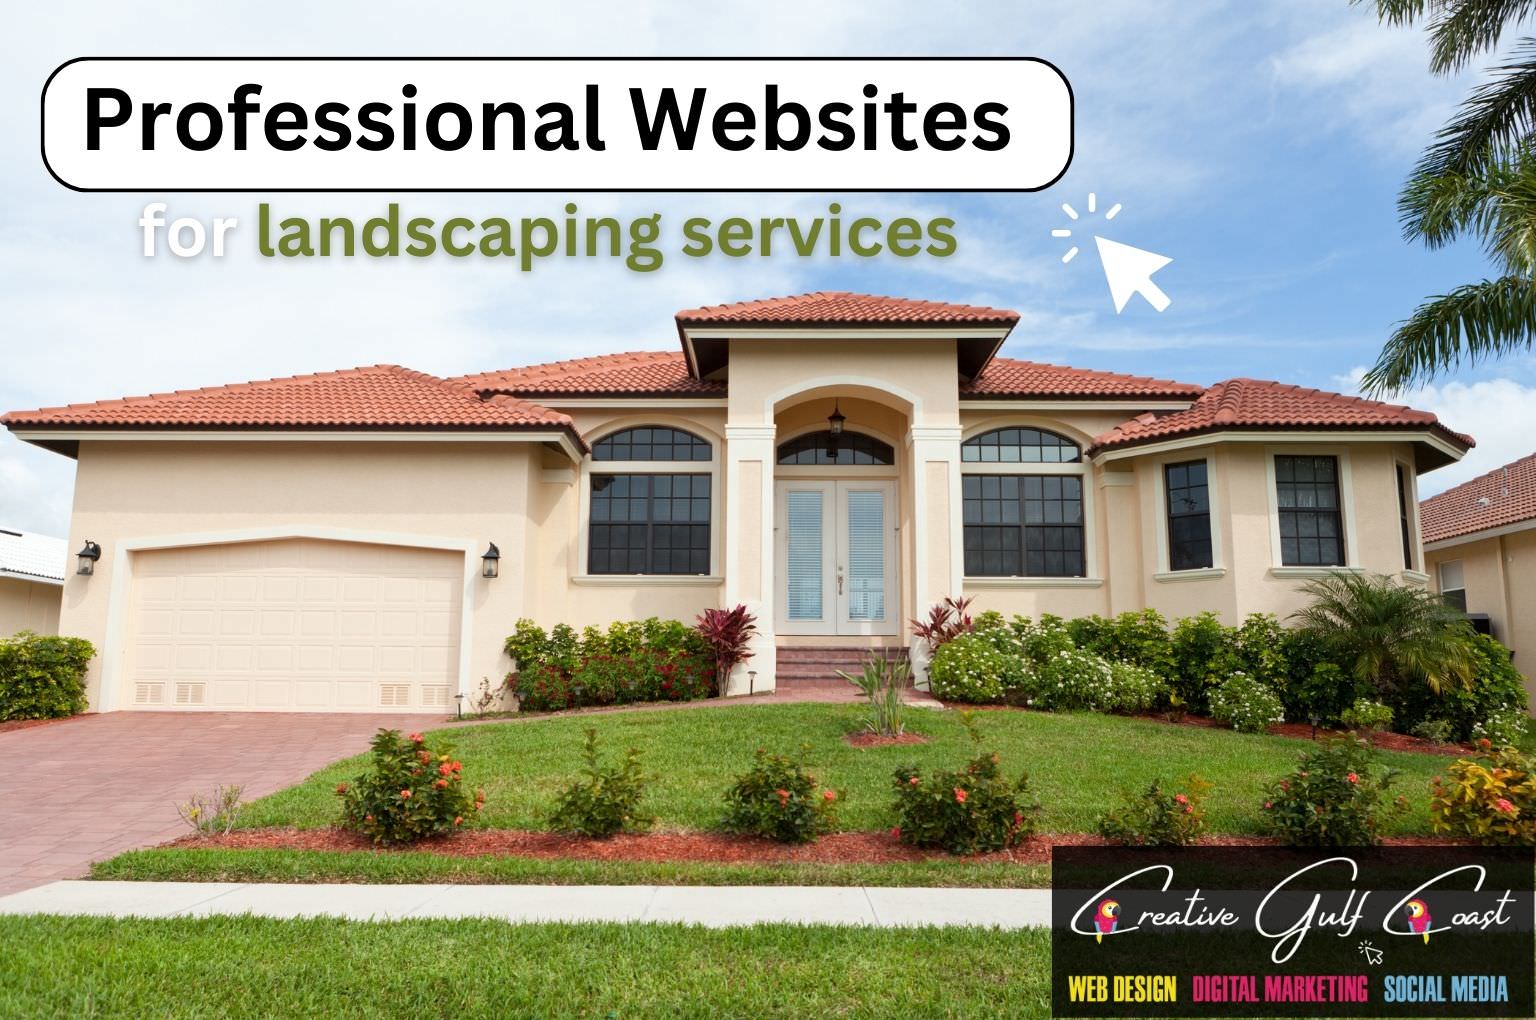 Website Designer for local landscaping services in Tampa Florida and beyond. Professional Marketing Agency Creative Gulf Coast